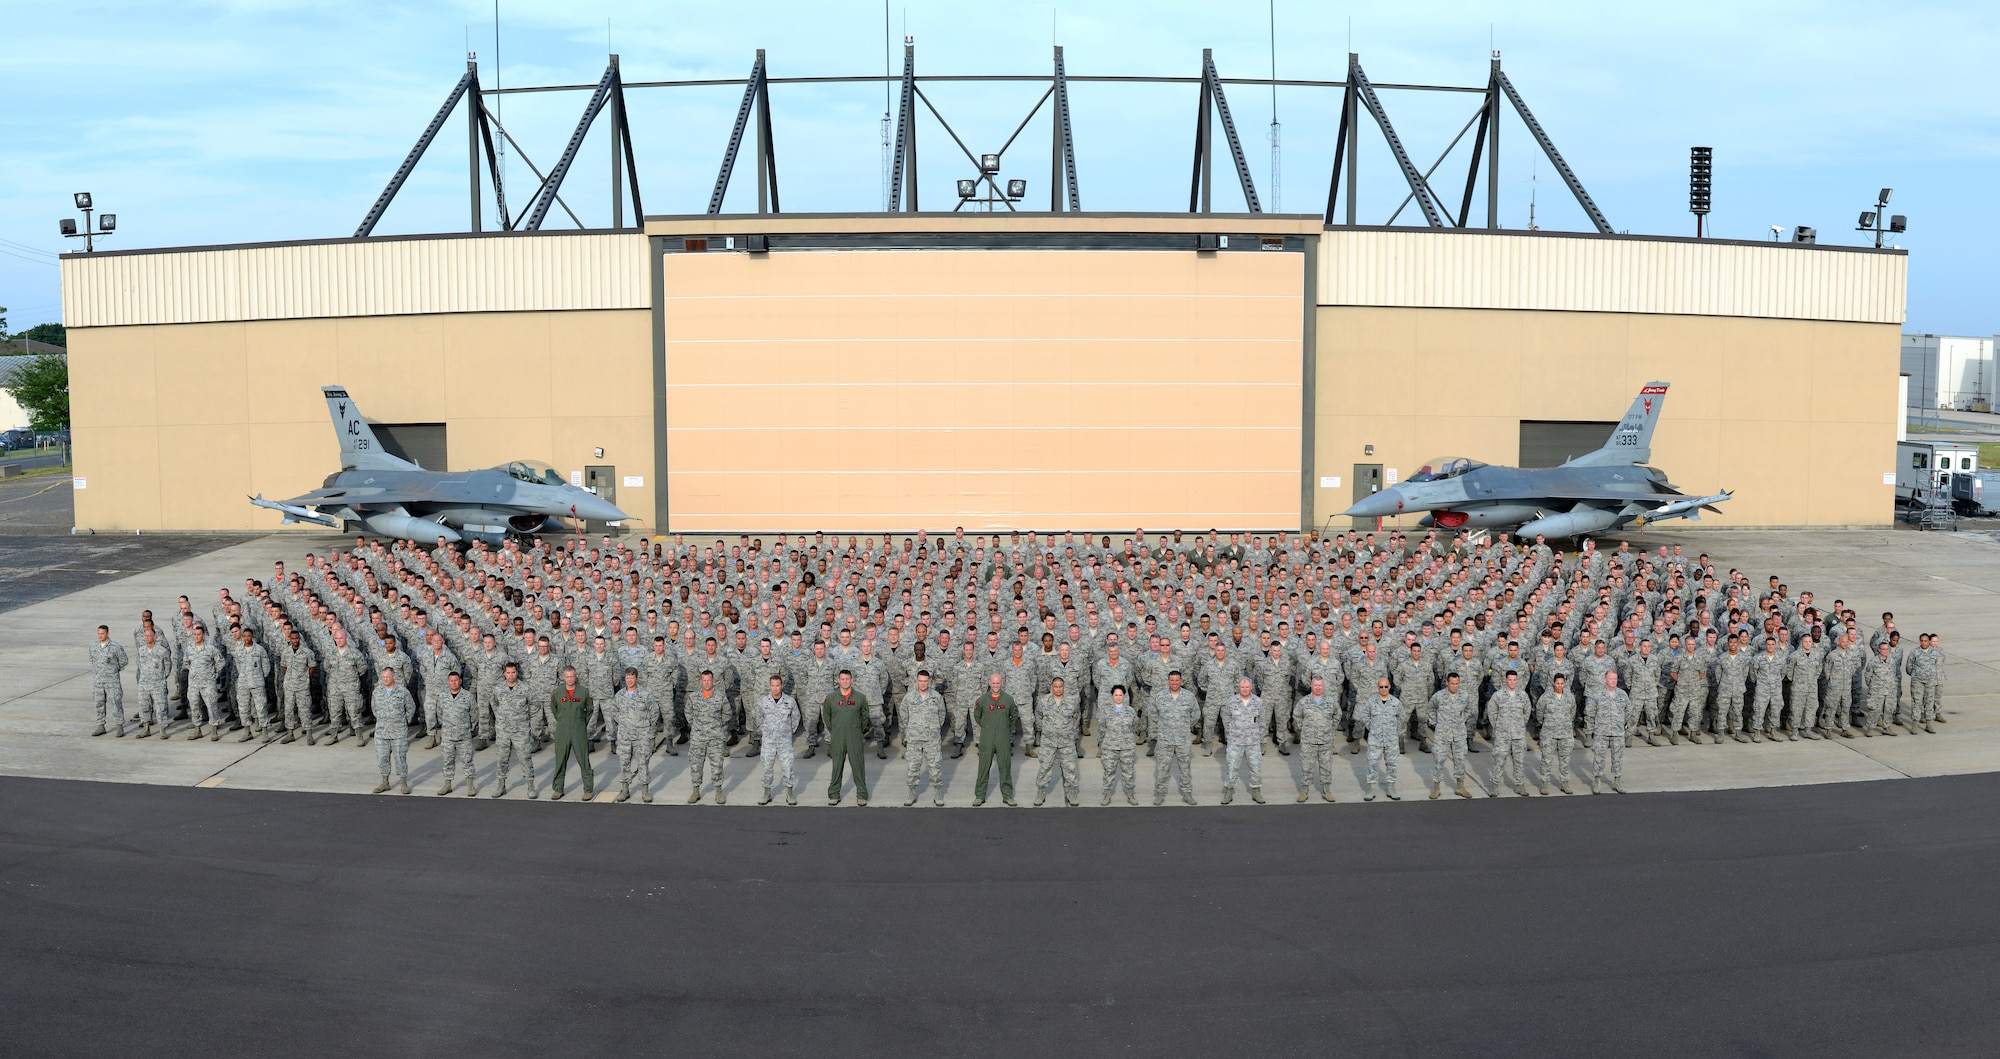 A picture of members of the 177th Fighter Wing of the New Jersey Air National Guard posing for a group photo at the Atlantic City Air National Guard base in front of two U.S. Air Force F-16C Fighting Falcons and a hangar.